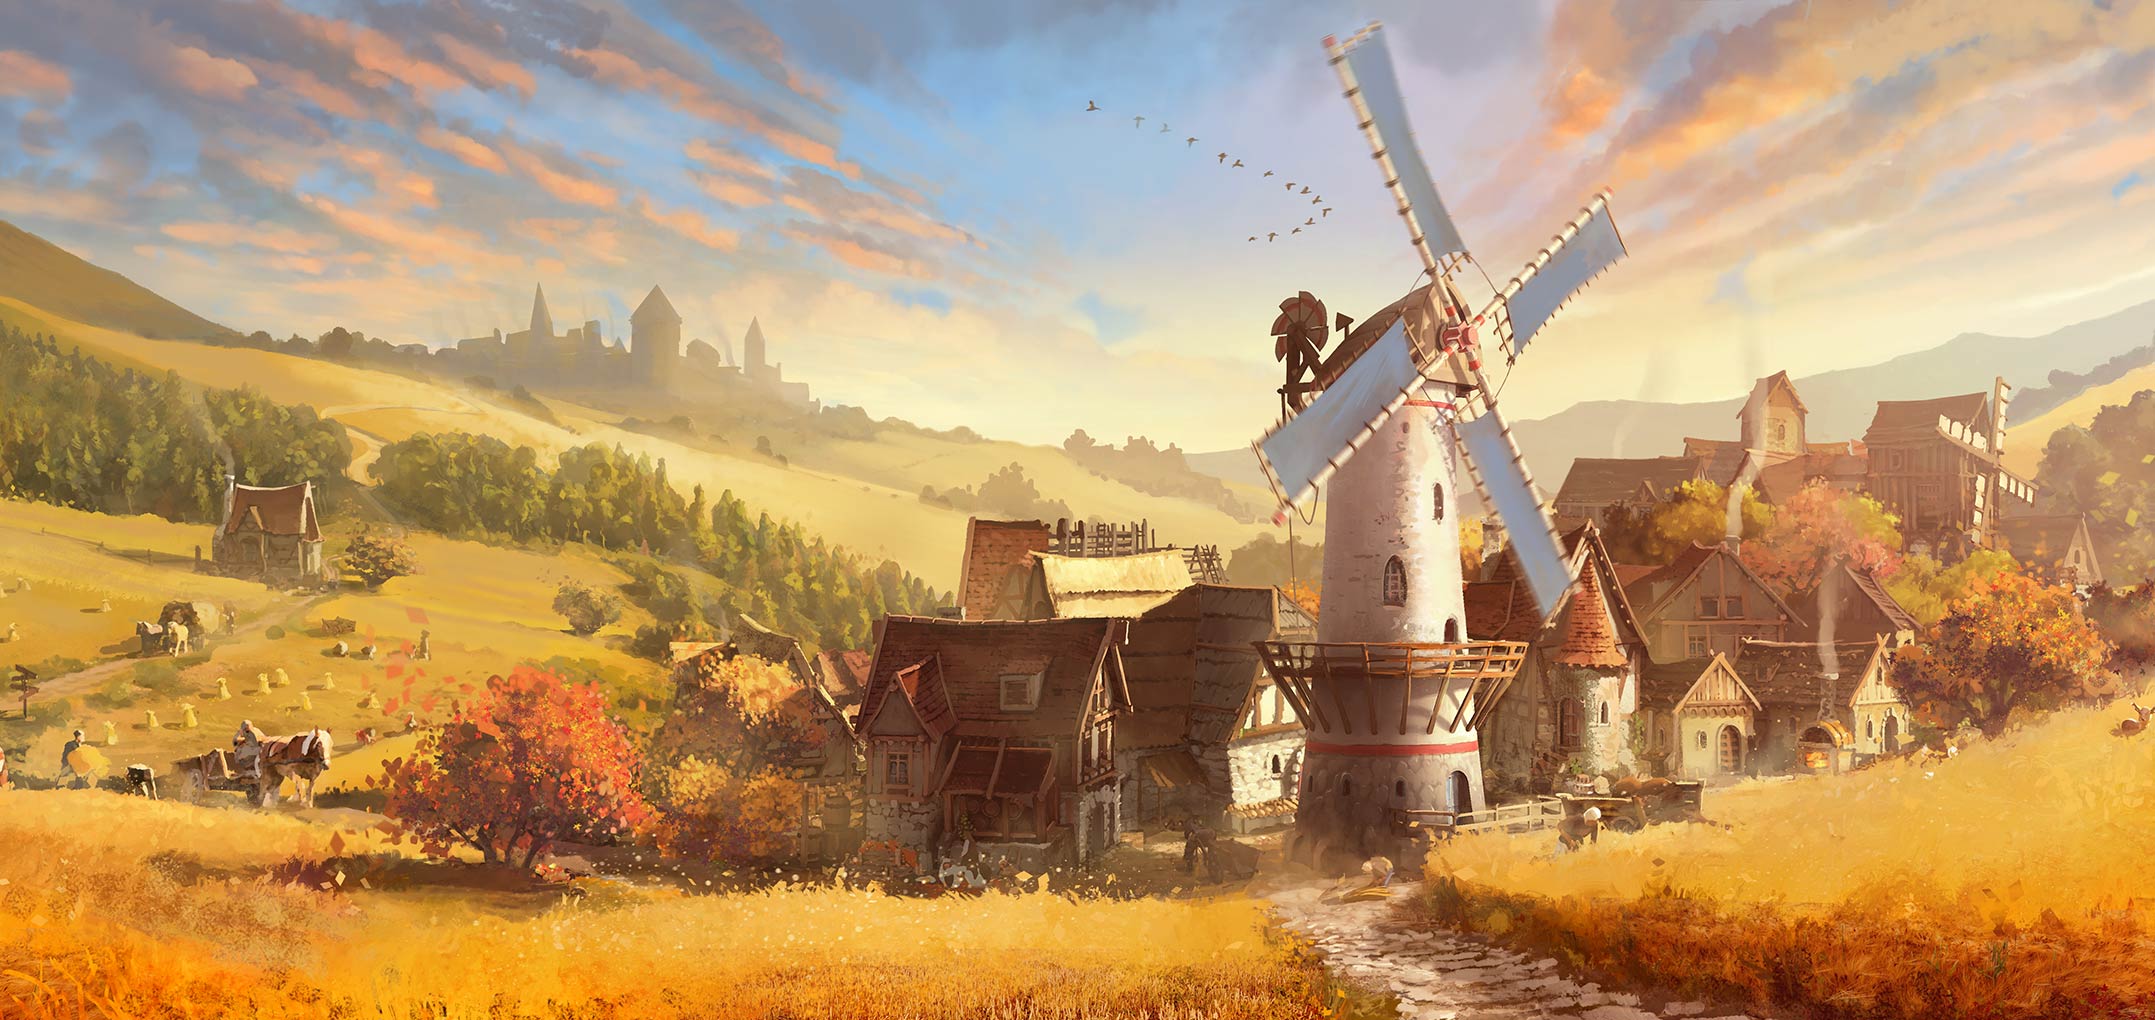 General 2155x1020 illustration video games Forge of Empires building video game art house windmill field landscape clouds dirt road trees idyllic